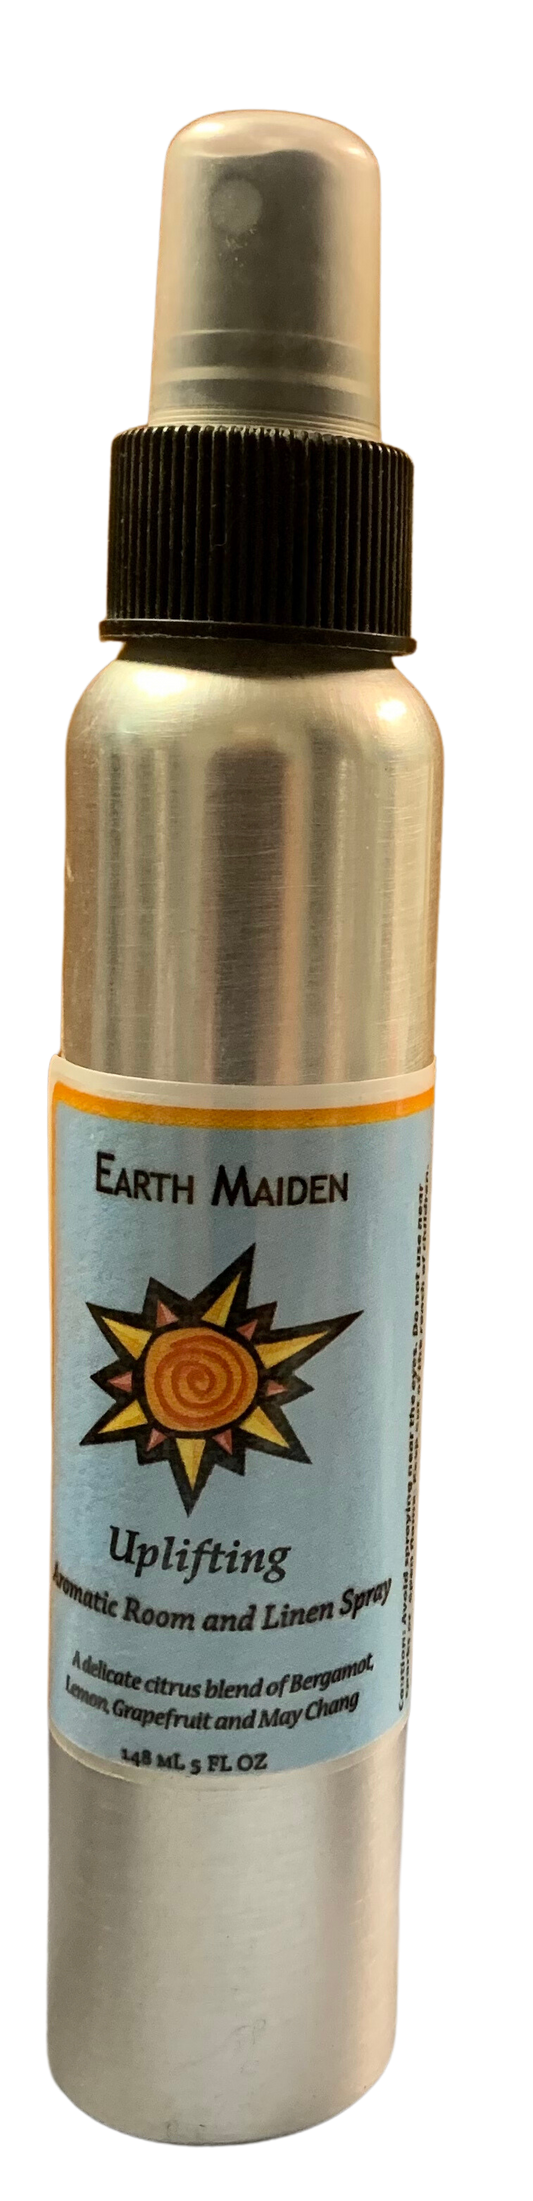 All Natural “Uplifting” Aroma Mist with Bergamot, Lemon, Grapefruit and May Chang Essential Oils in 5 ounce metal bullet container with fine mist sprayer.